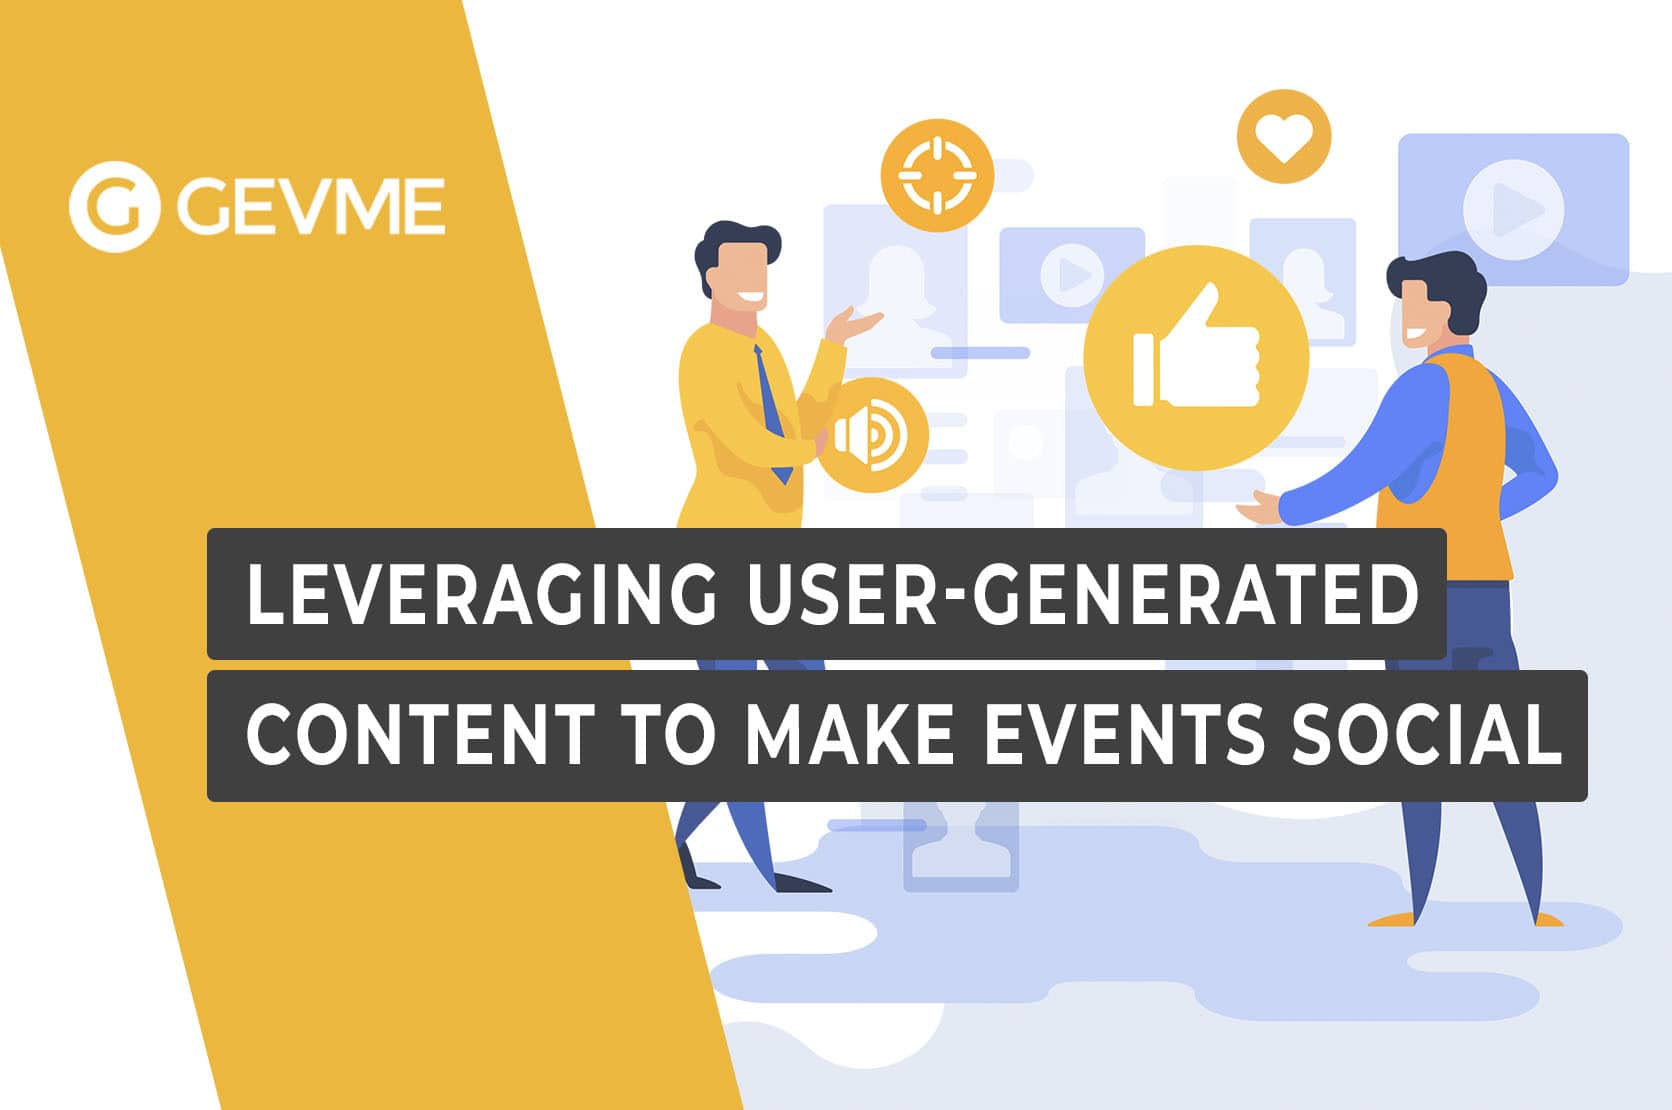 Leveraging user-generated content to make events more social